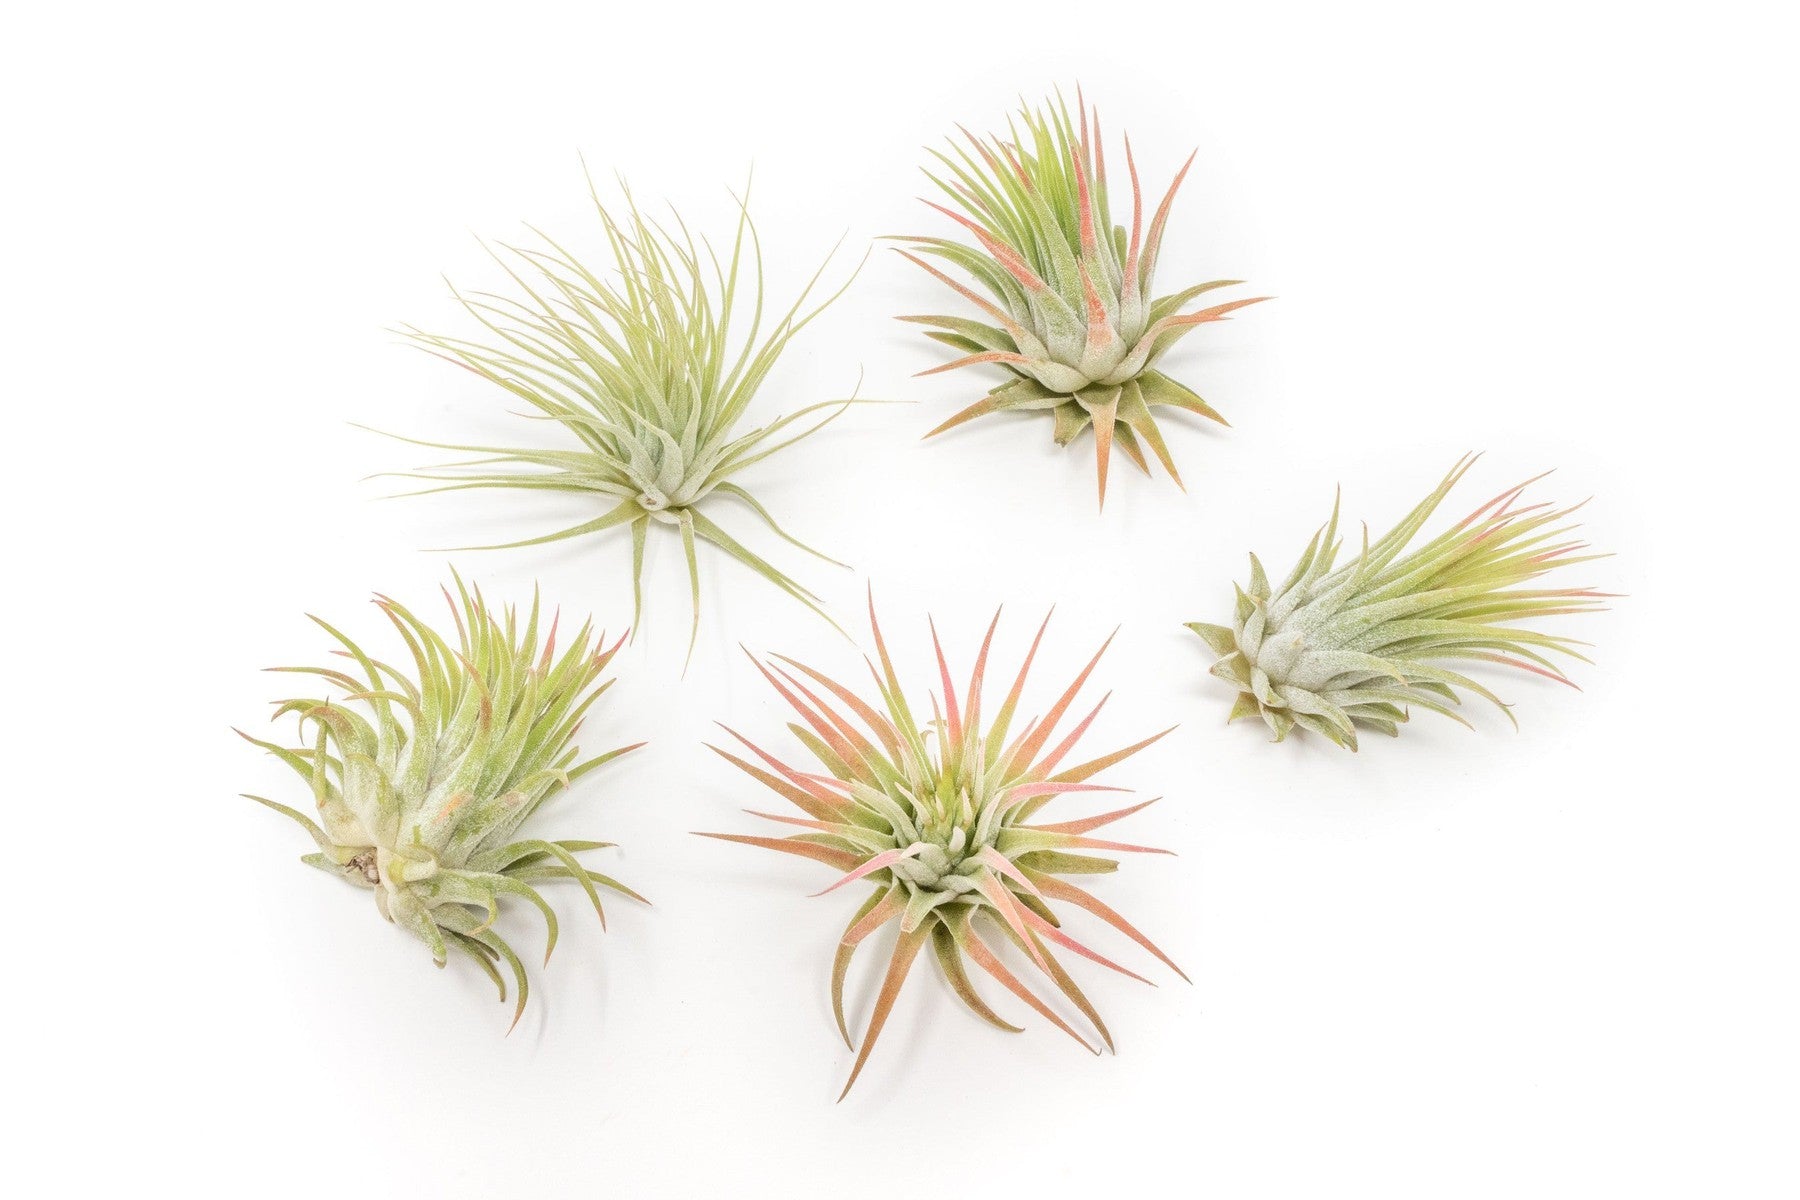 SALE - Tillandsia Ionantha Rubra Air Plants - Set of 10 or 20 - 40% Off-airplant-The Succulent Source